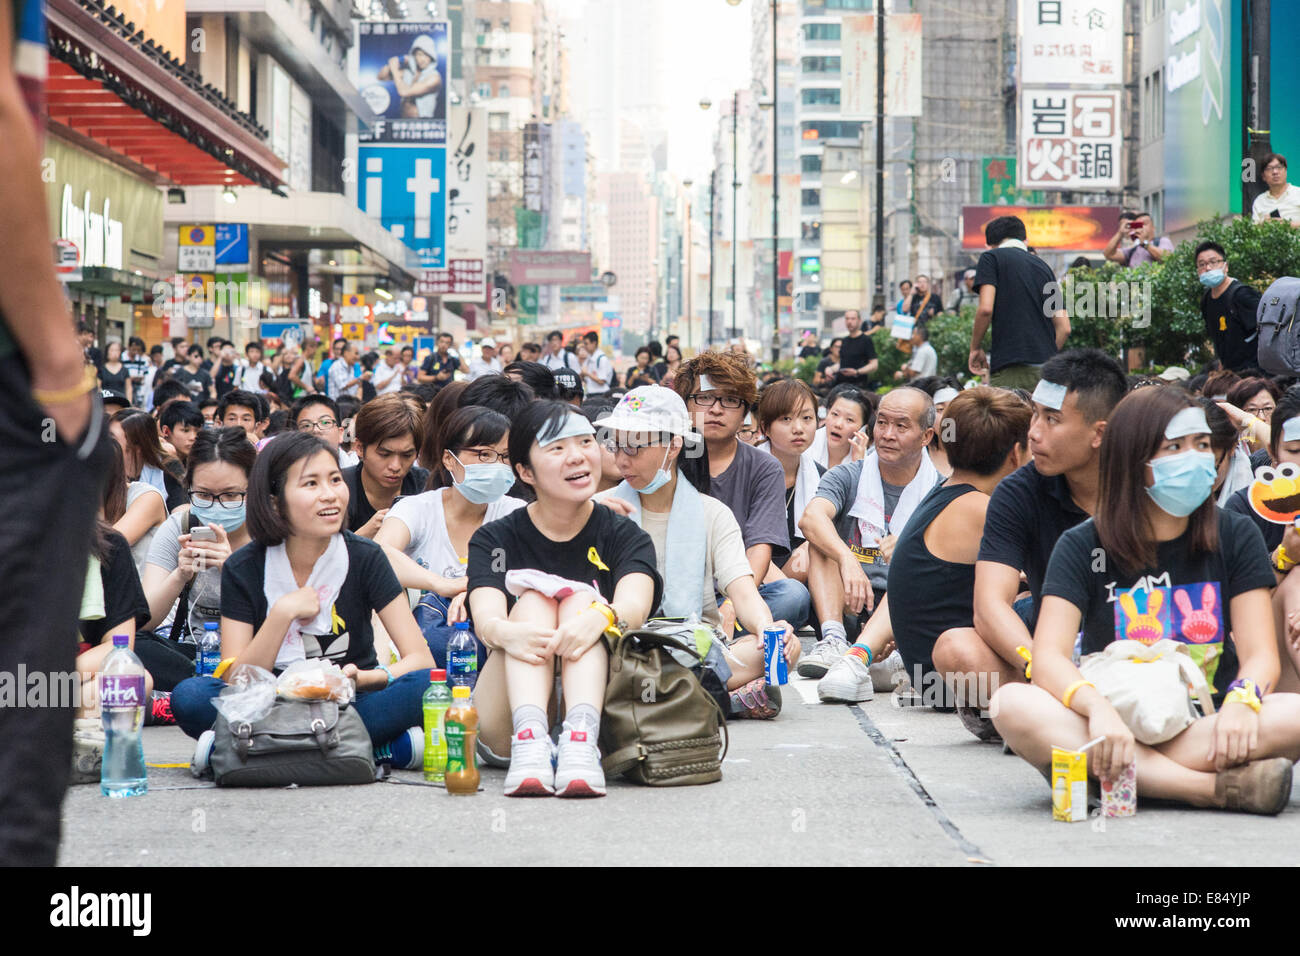 Hong Kong, China. 29th September, 2014. People  are occupying in Causeway Bay and Mongkok, for a democratic election. Credit:  kmt rf/Alamy Live News Stock Photo